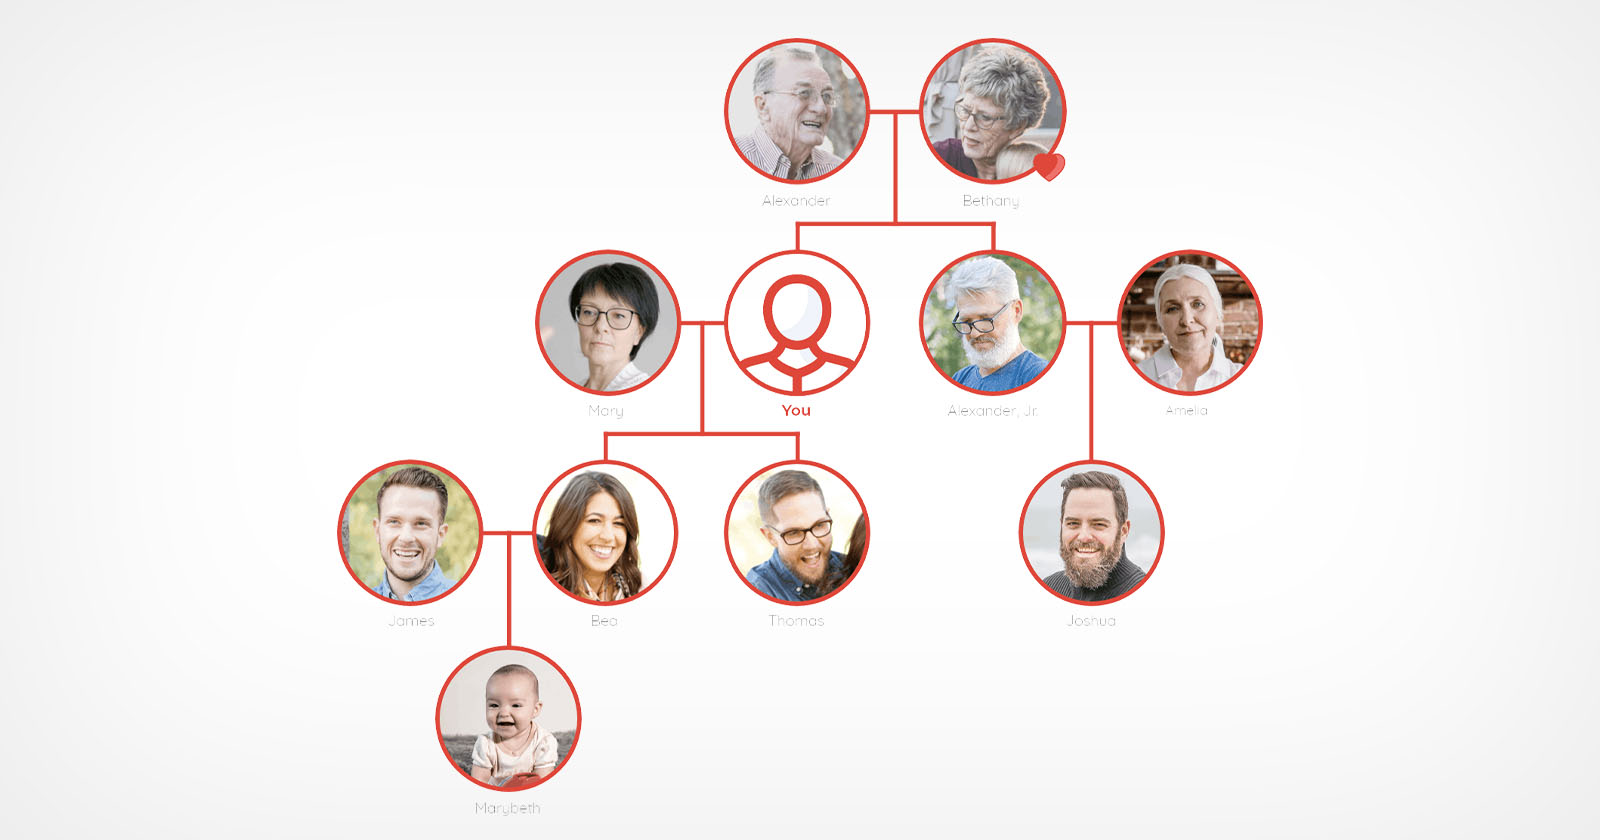 A virtual family tree made in Inalife is depicted.